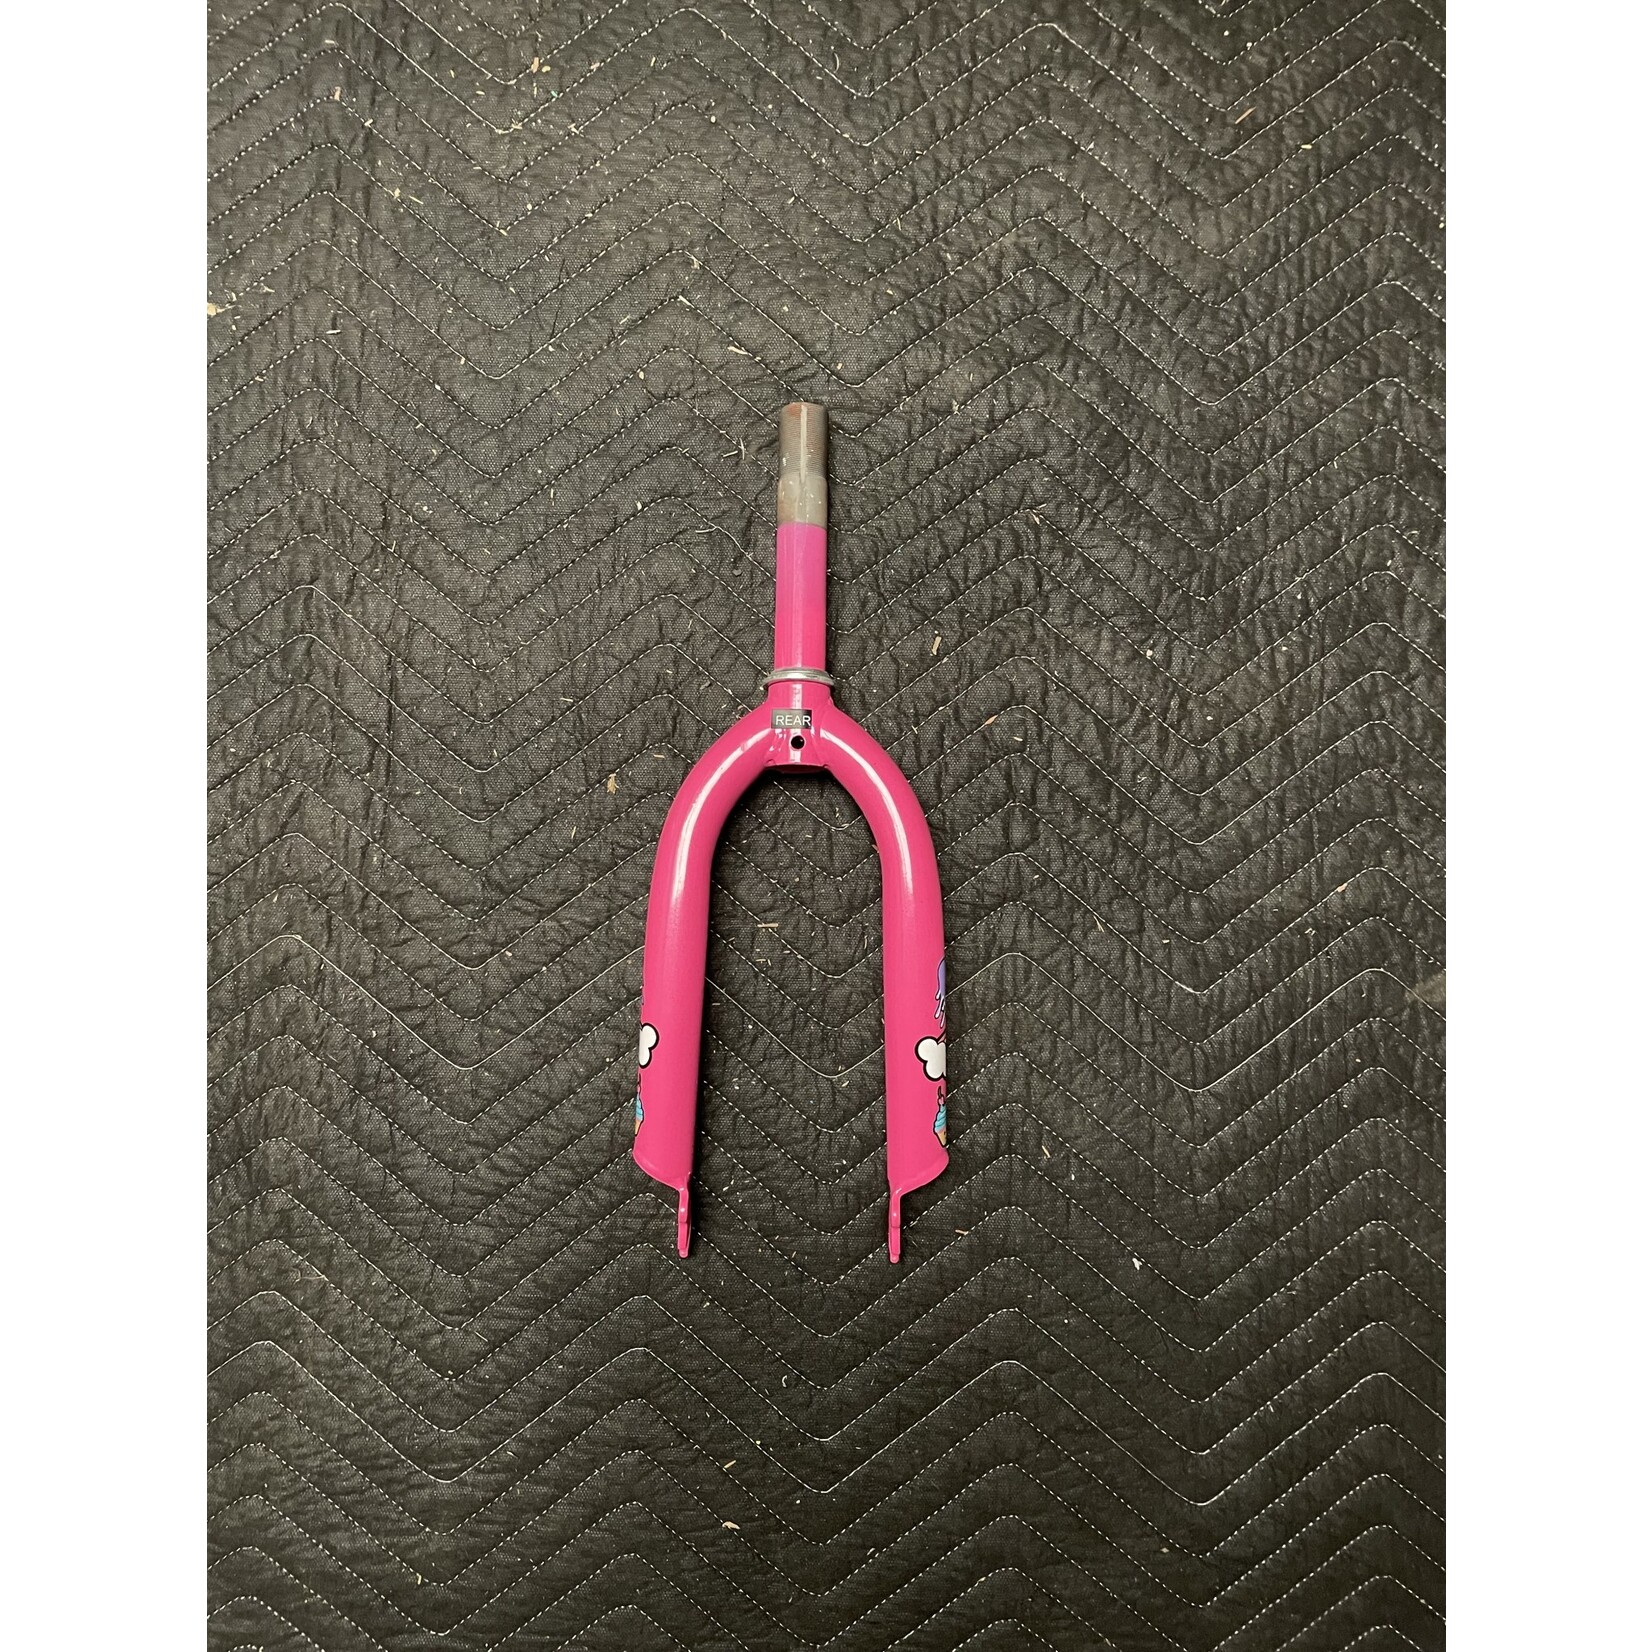 1” x 5 1/2” Threaded 16" Bicycle Fork (Pink & Rainbow)